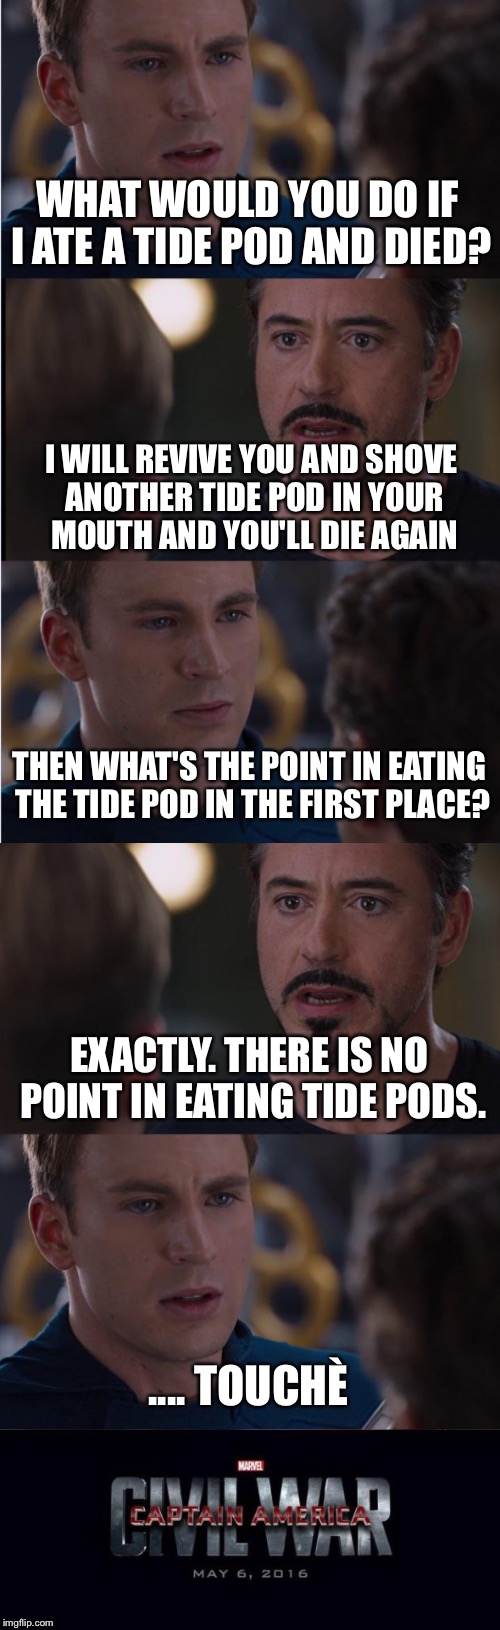 If you eat a tide pod, you're dead to me. | WHAT WOULD YOU DO IF I ATE A TIDE POD AND DIED? I WILL REVIVE YOU AND SHOVE ANOTHER TIDE POD IN YOUR MOUTH AND YOU'LL DIE AGAIN; THEN WHAT'S THE POINT IN EATING THE TIDE POD IN THE FIRST PLACE? EXACTLY. THERE IS NO POINT IN EATING TIDE PODS. .... TOUCHÈ | image tagged in memes,marvel civil war,captain america,iron man,tide pods | made w/ Imgflip meme maker